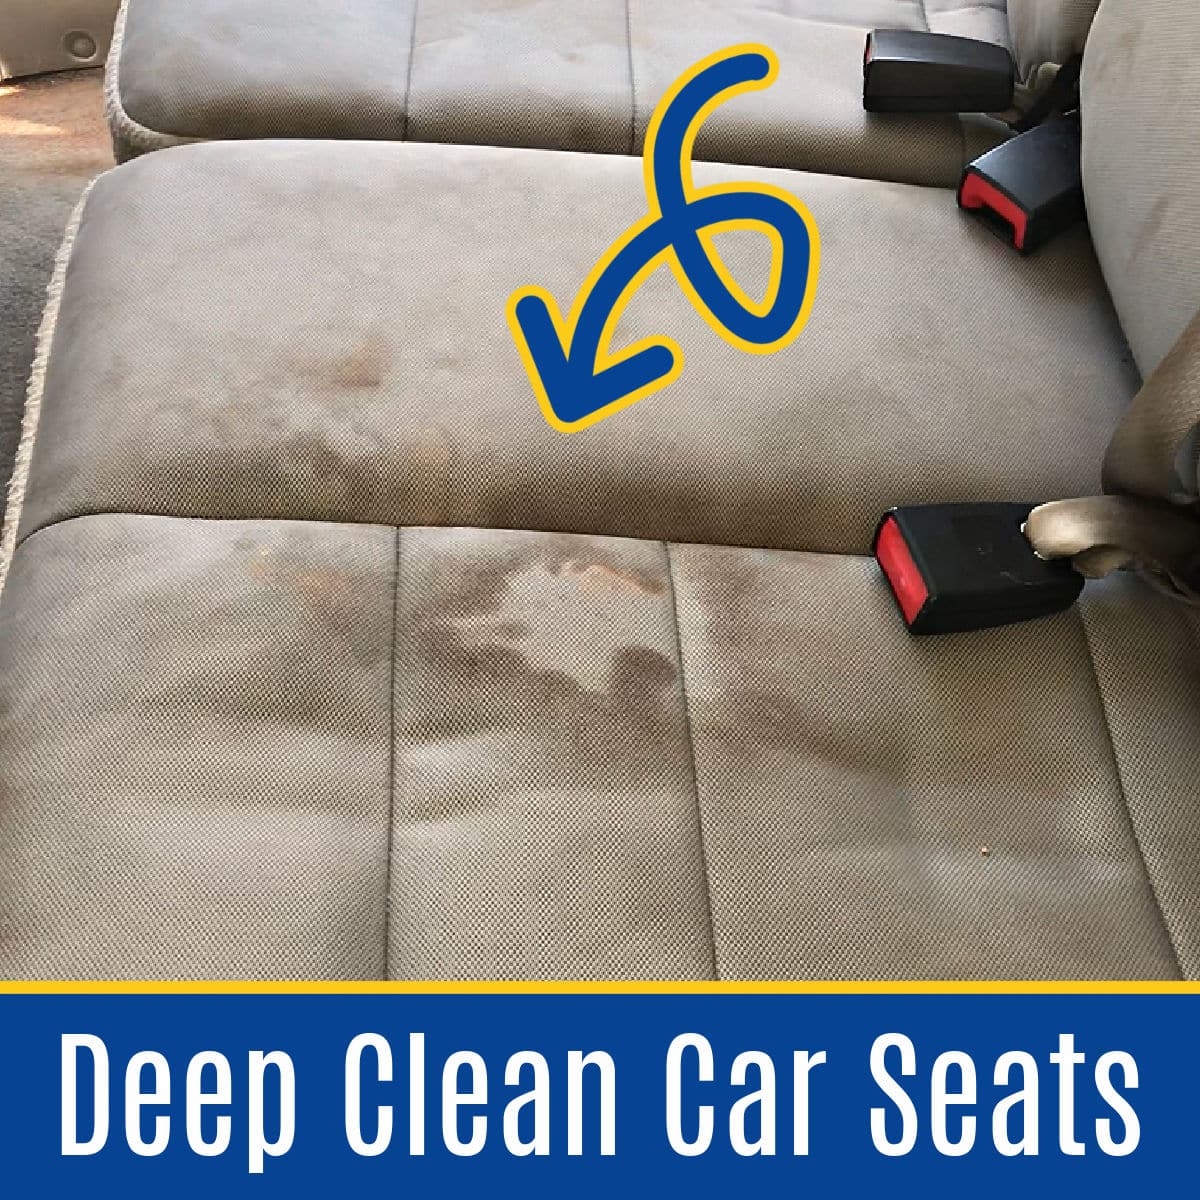 How to Clean Your Car Interior Seats and Carpets Thoroughly: 10 Easy Steps